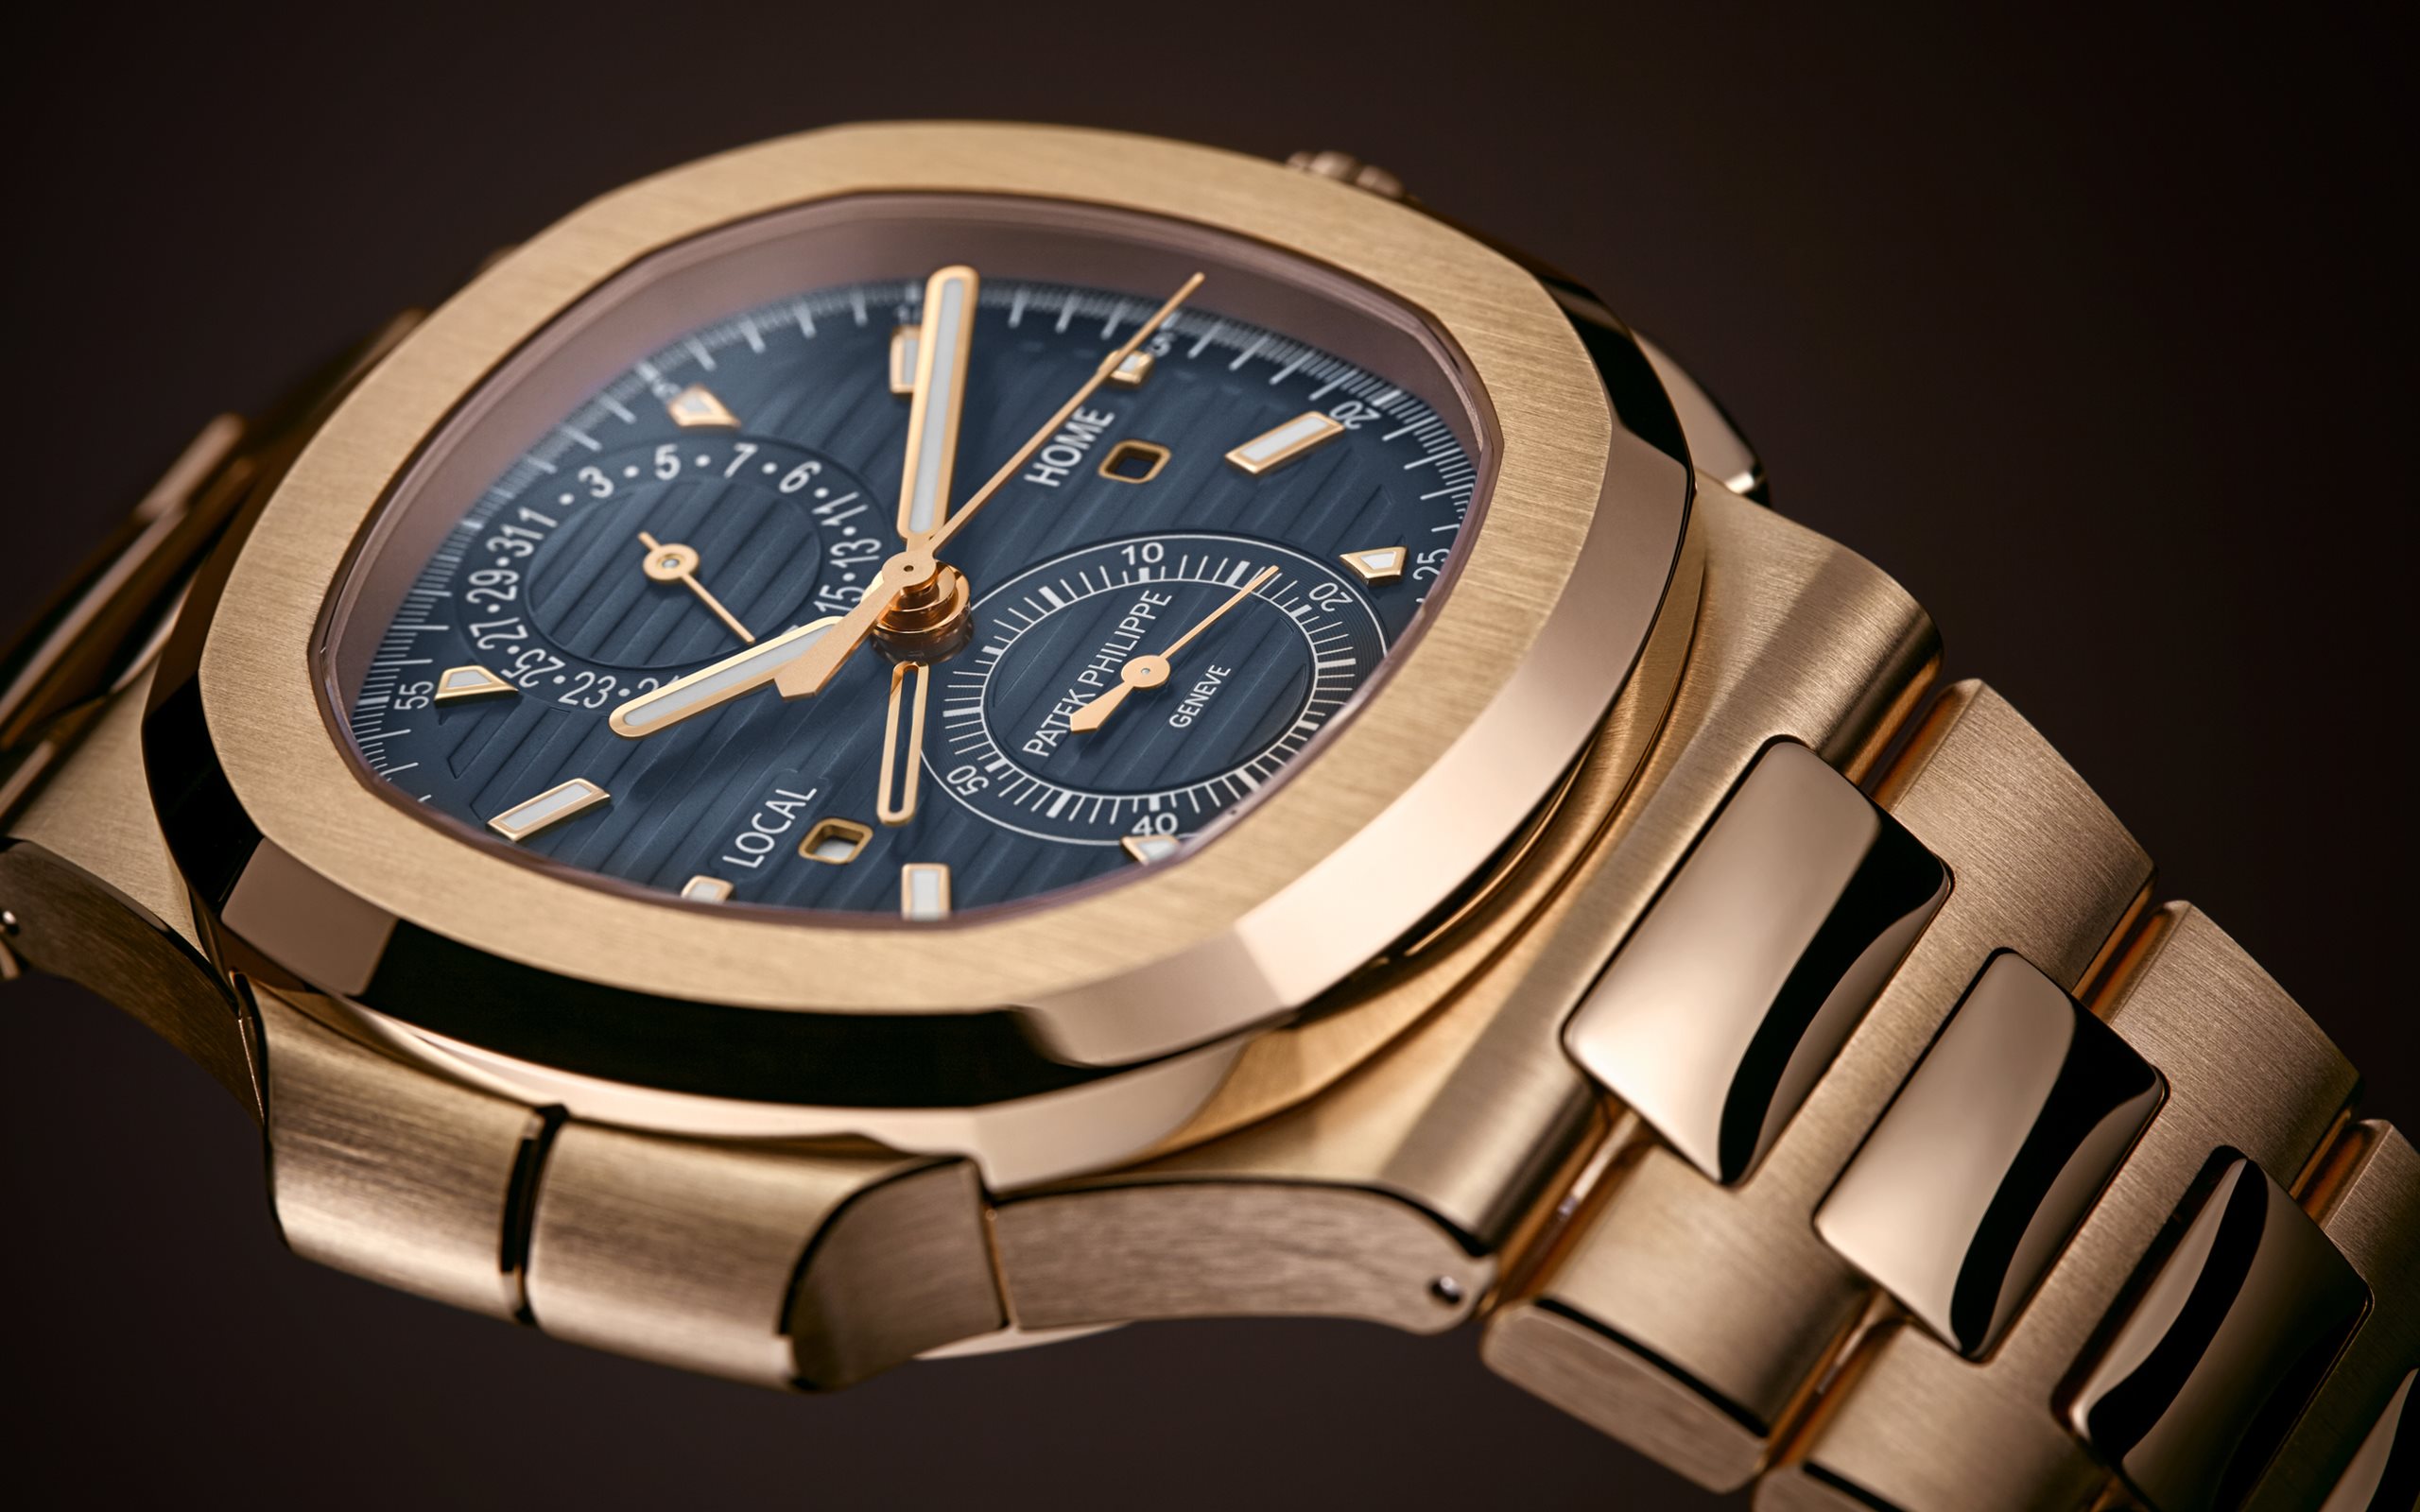 Watch of the Week: Patek Philippe Nautilus Travel Time Chronograph 5990/1R